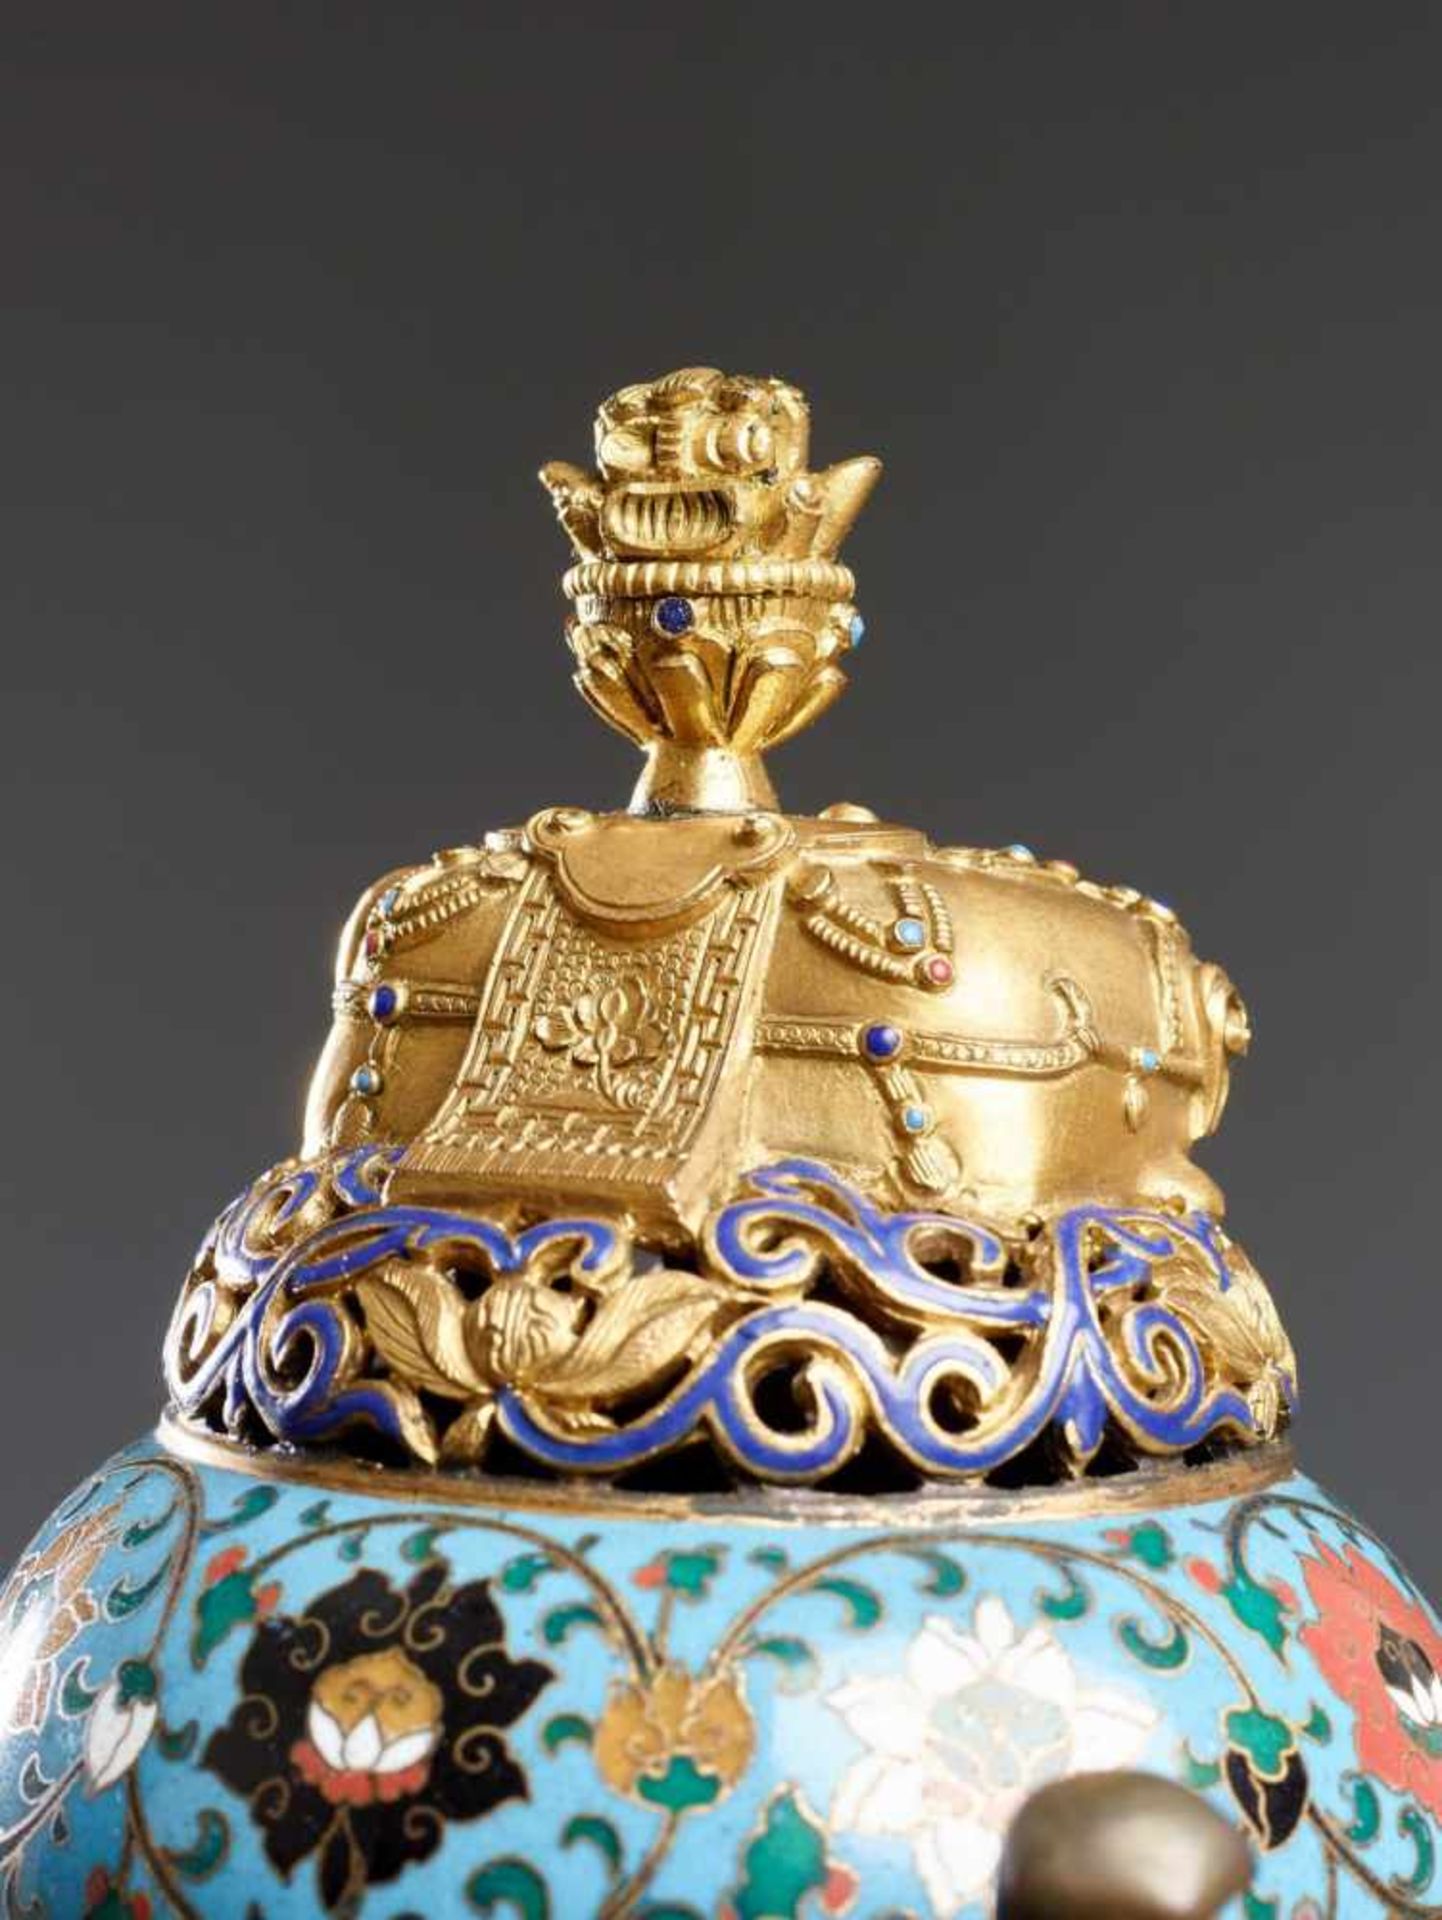 THREE-LEGGED INCENSE VESSEL WITH ELEPHANTS Enamel cloisonné with gilding. China, Qing Dynasty, - Image 7 of 9